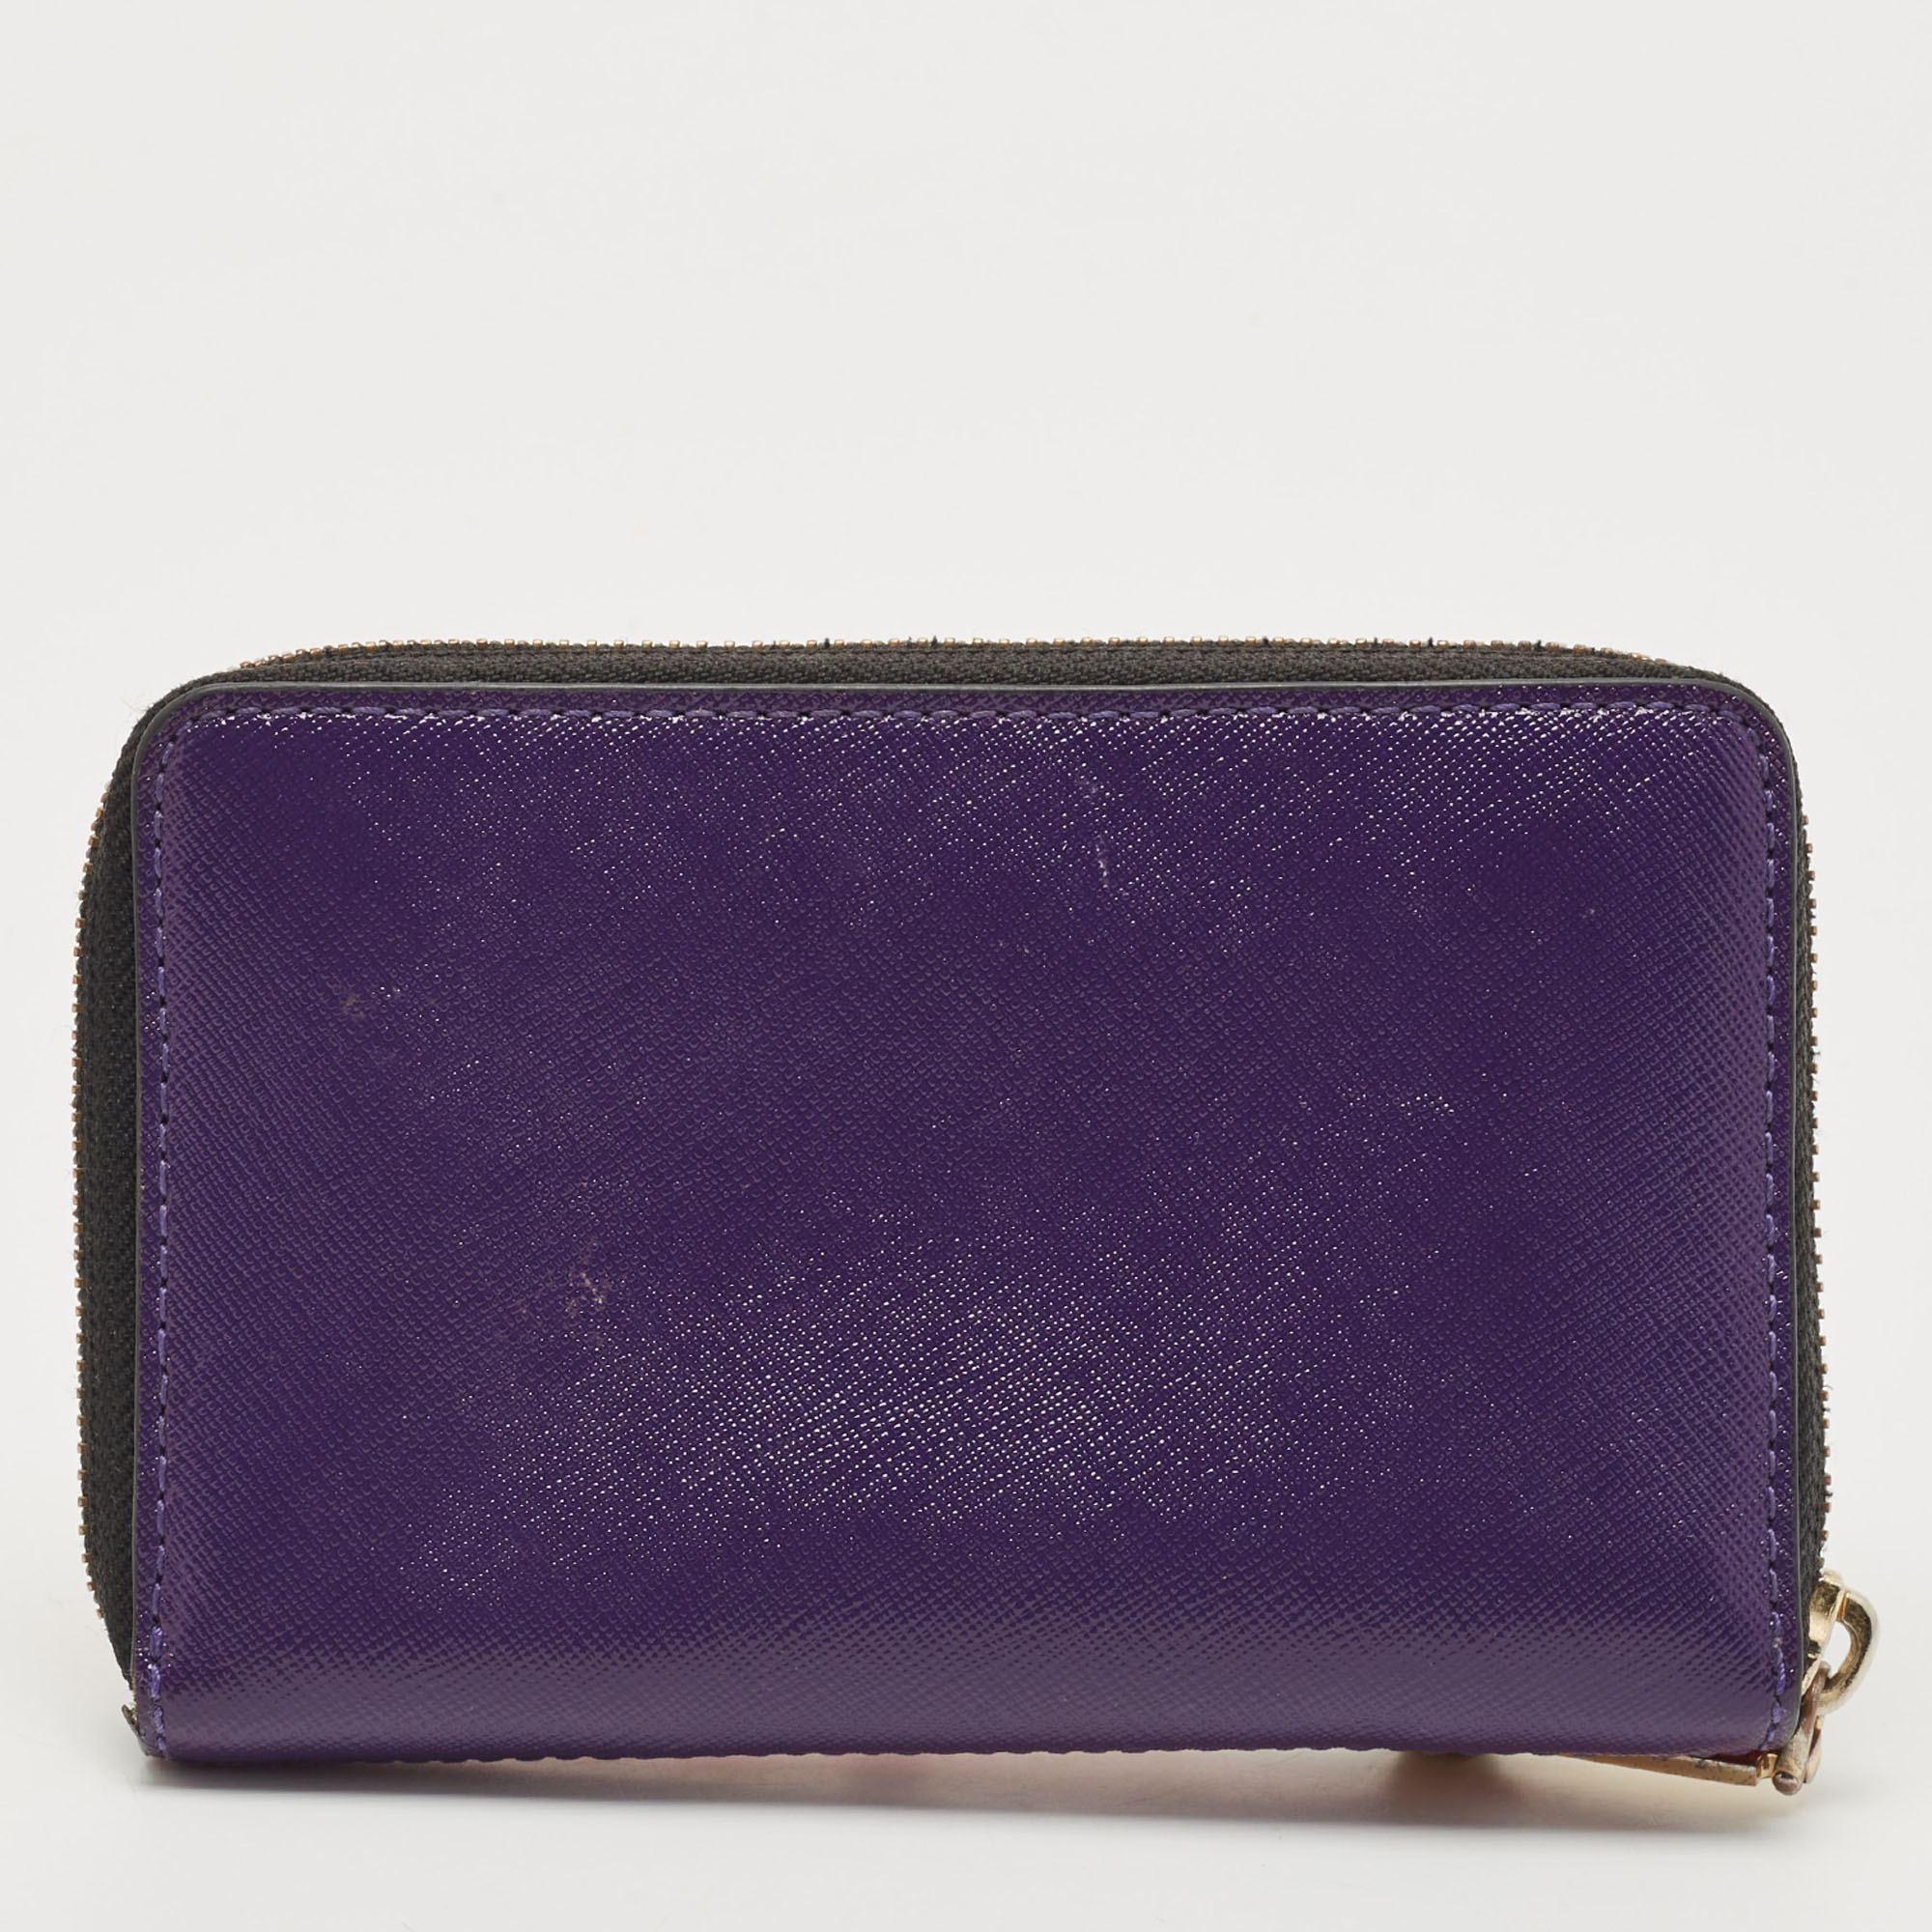 Marc Jacobs Pink/Purple Saffiano Leather Snapshot Compact Wallet